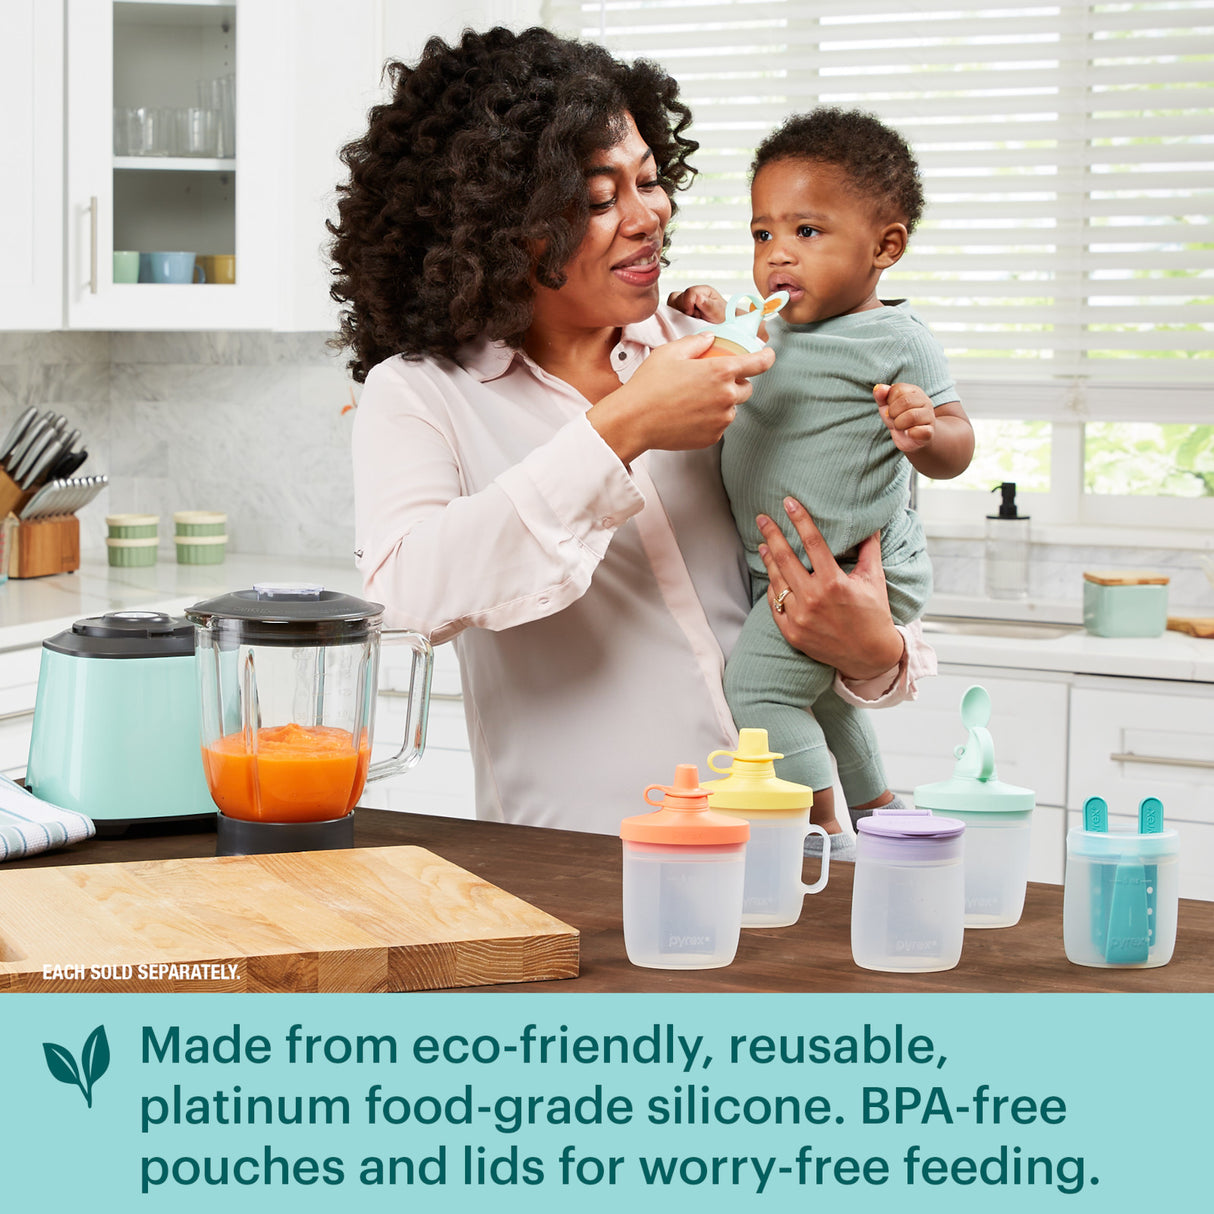 Baby being fed with Little spoon with text made from eco-friendly reusable platinum food-grade silicone. BPA free pouches & lids for worry free feeding